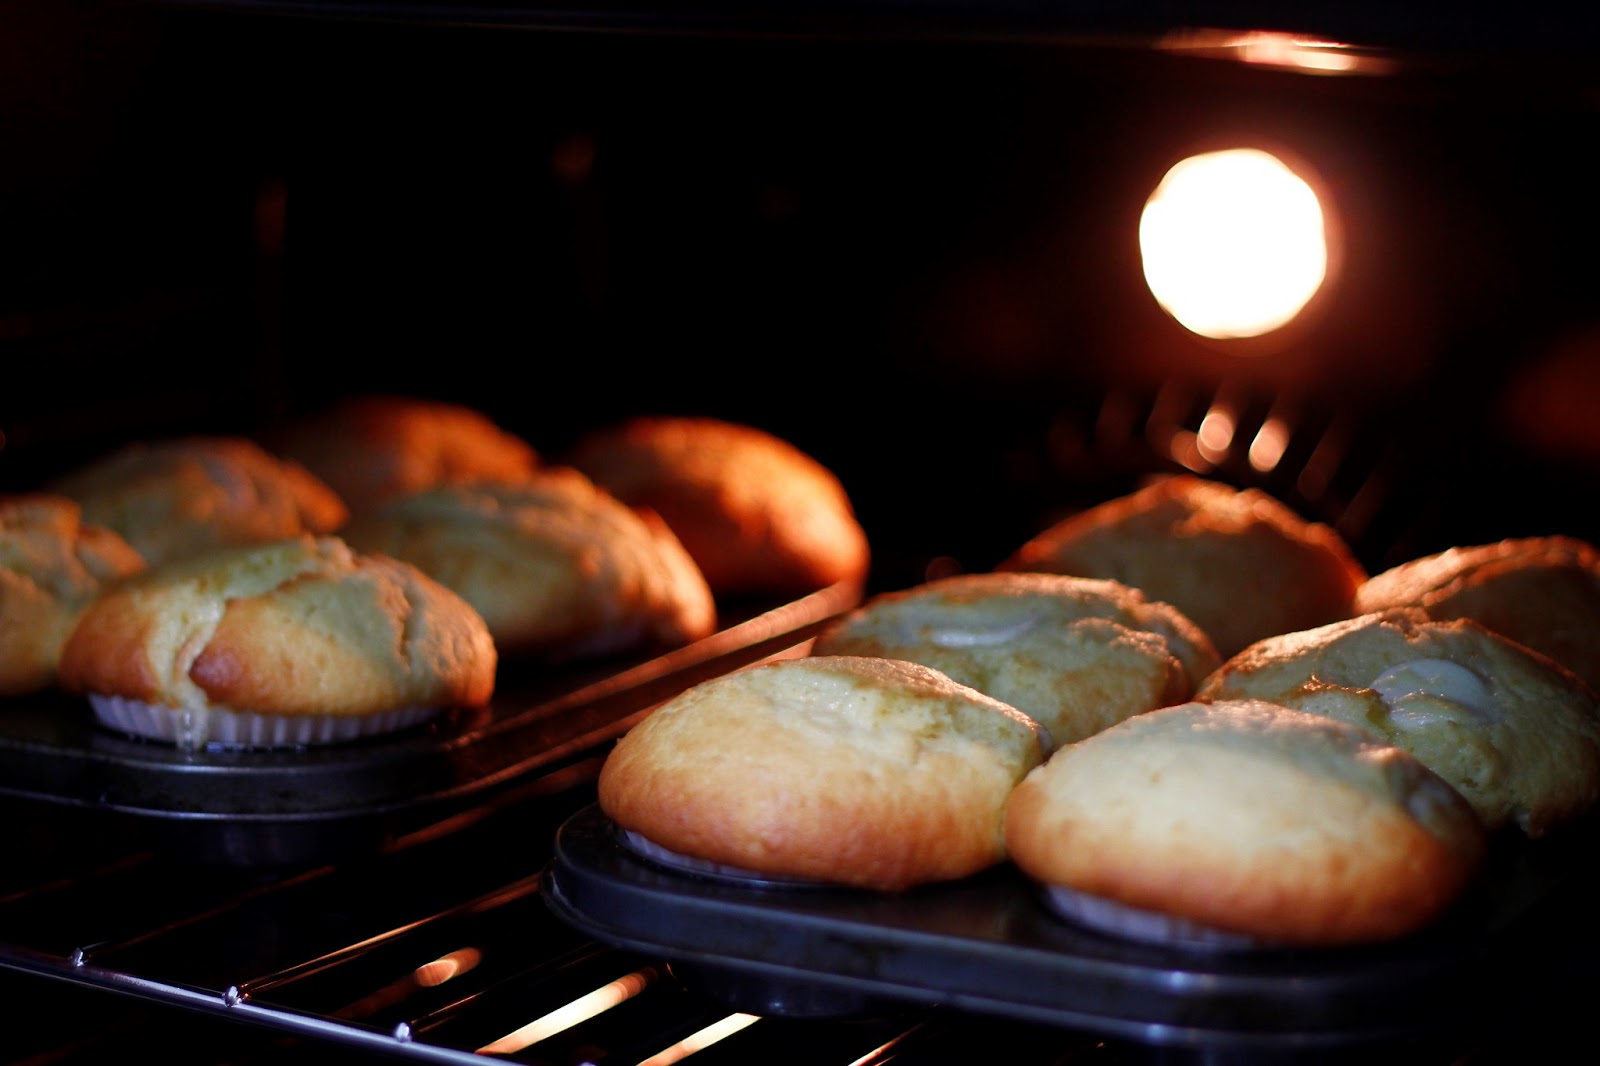 muffins cooking in the oven